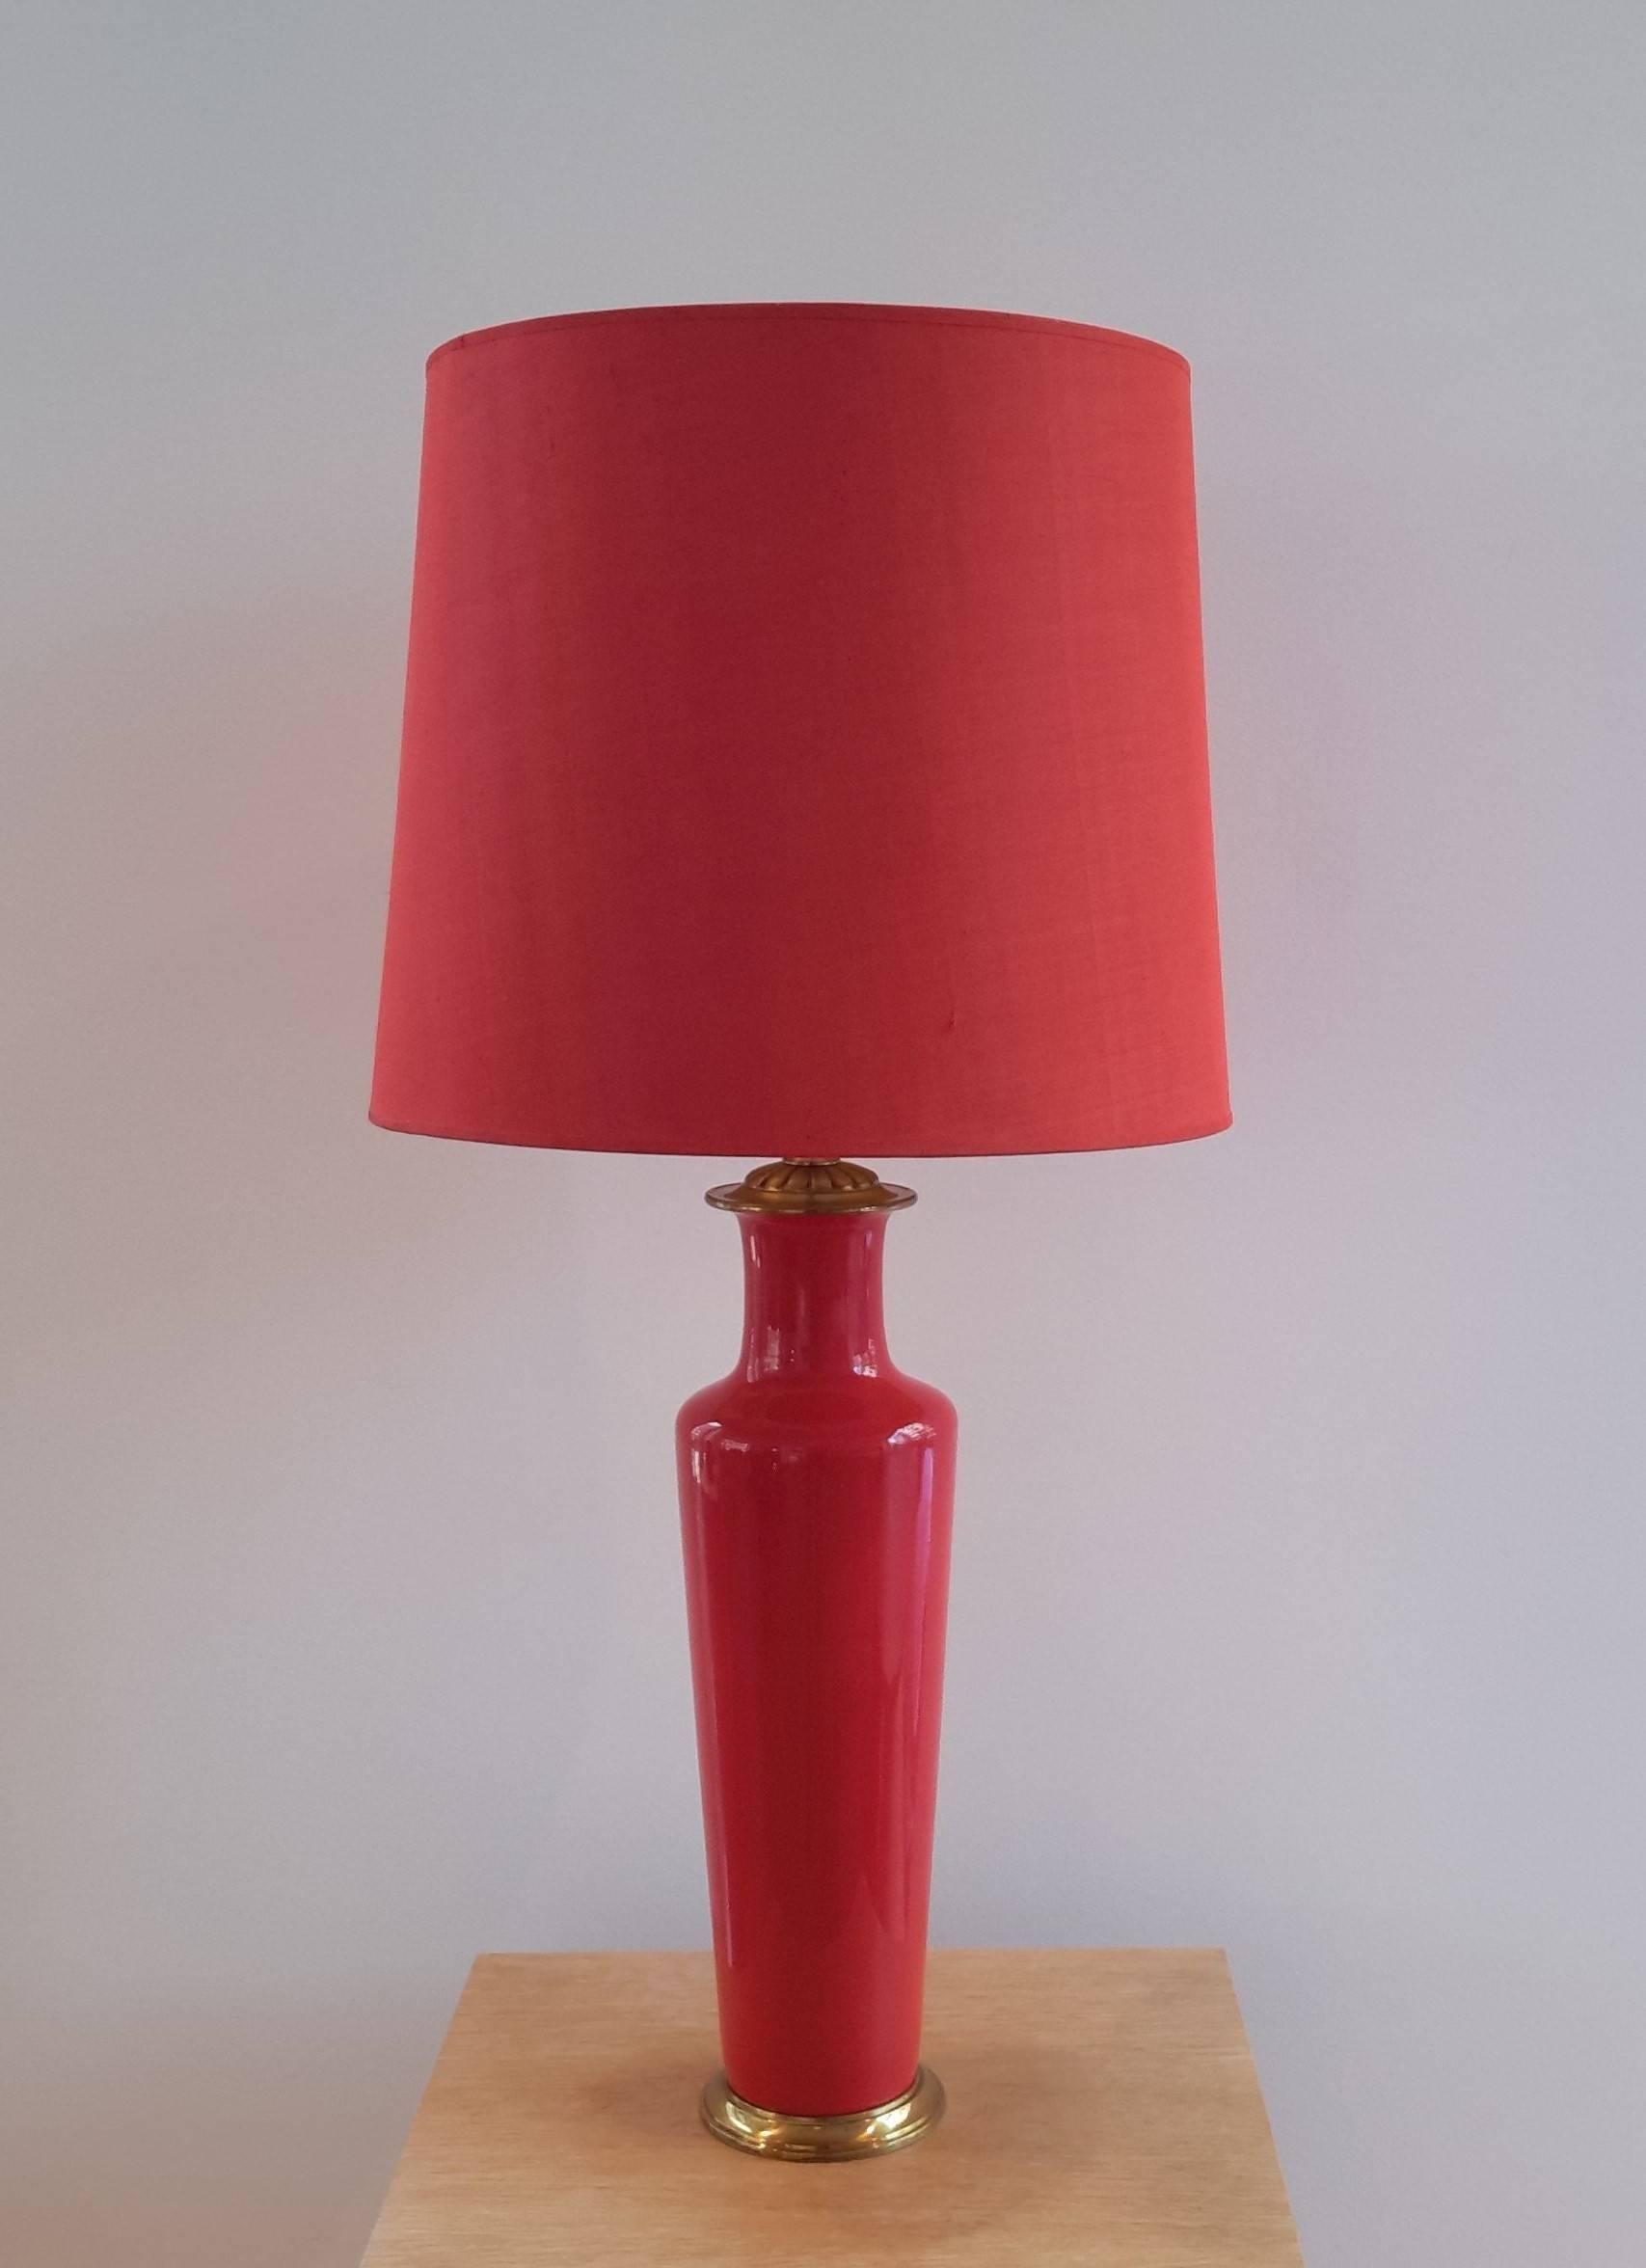 Tall coral red glass lamp executed by Venini, glassworks in Murano, (Italy), made of a vase designed by Carlo Scarpa, model #3943 with a brass-plated metal frame, original assembling (some fading).
Two light bulbs (big sockets). Adjustable height